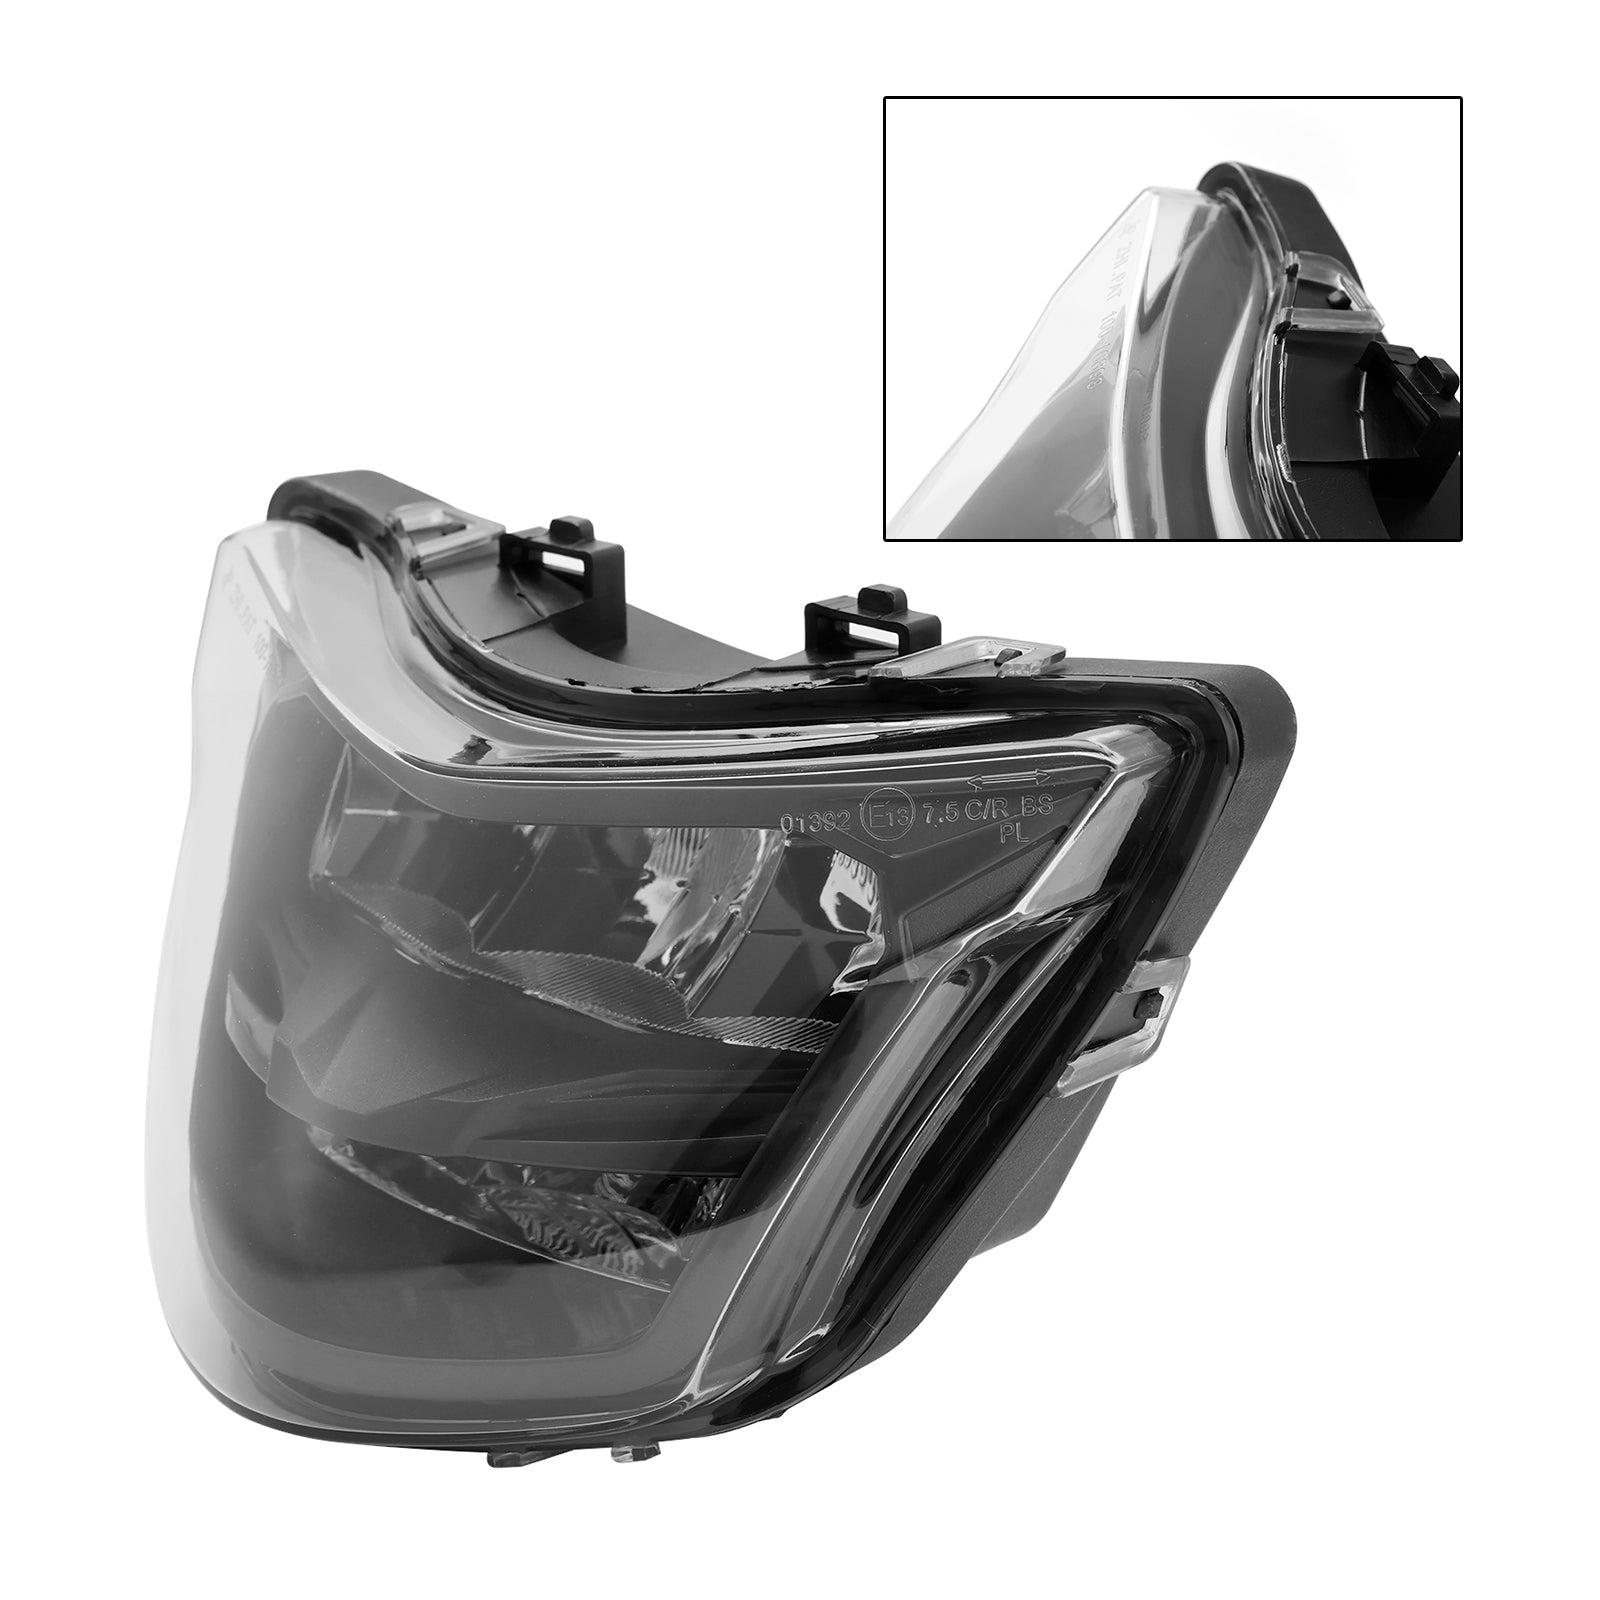 Front Headlight Grille Headlamp Protector For Yamaha Lc150 Y15Zr Scooter Smoke